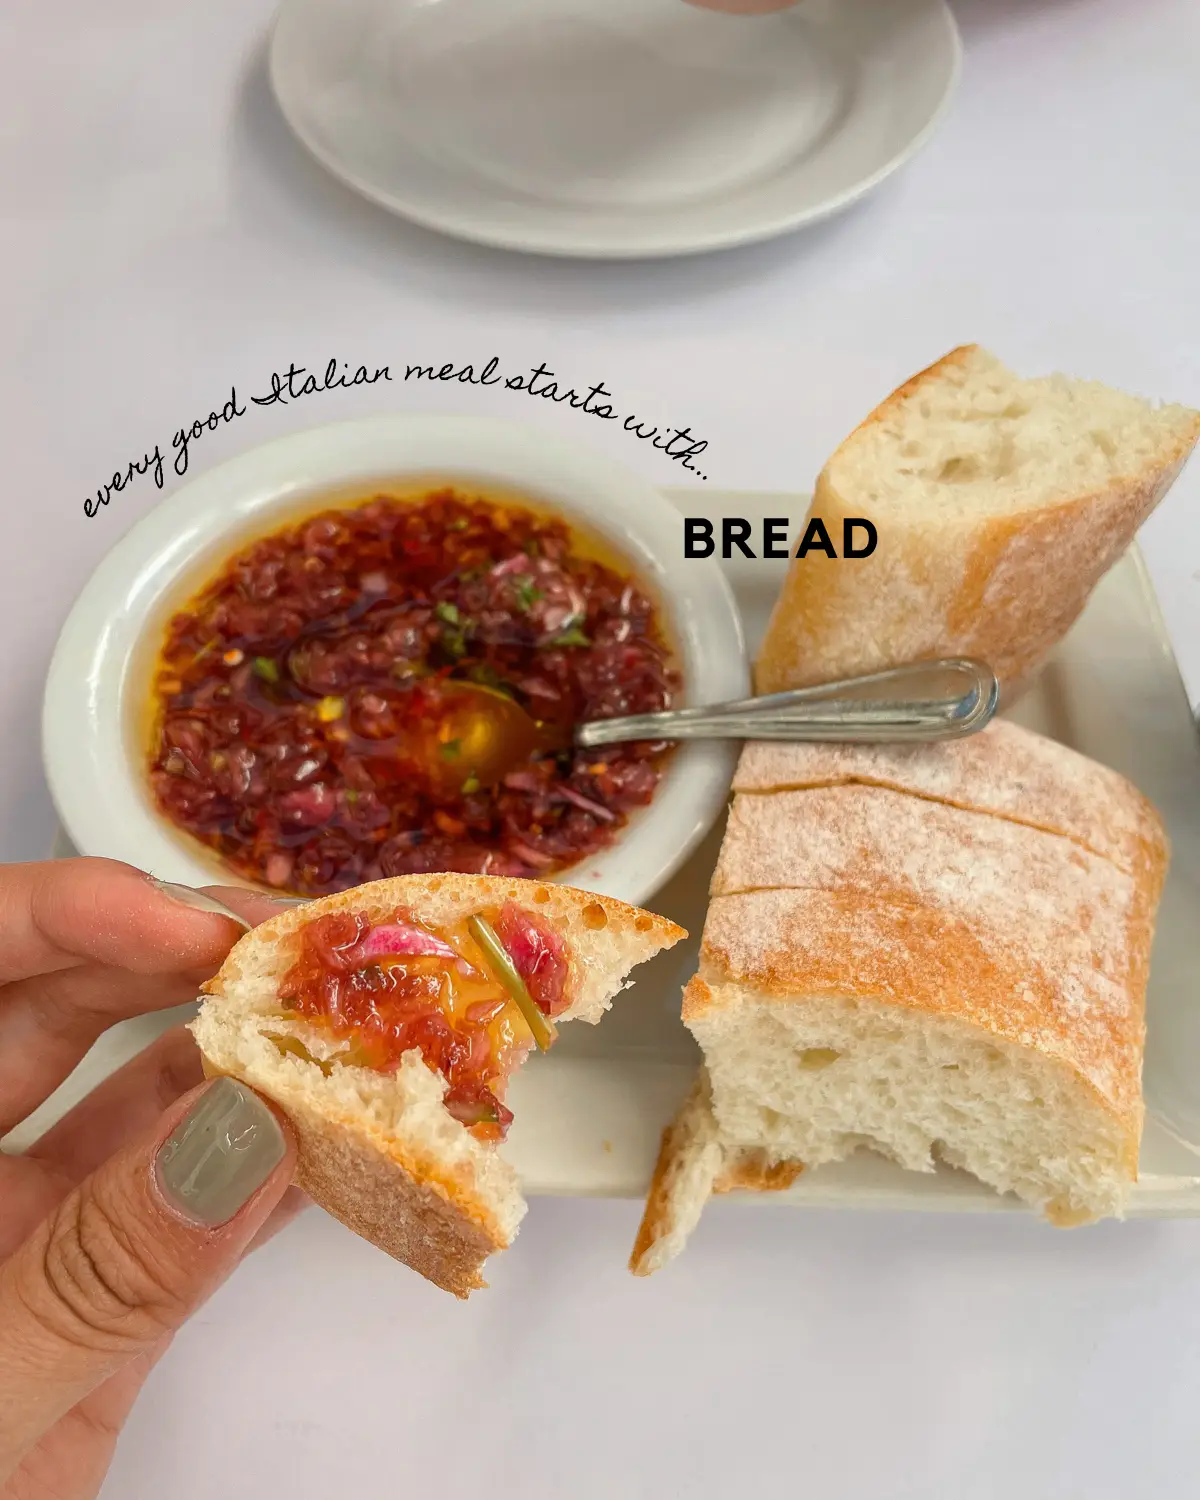  A person is holding a spoon in their hand and is about to eat a slice of bread. The image also contains a bowl of food and a sandwich.